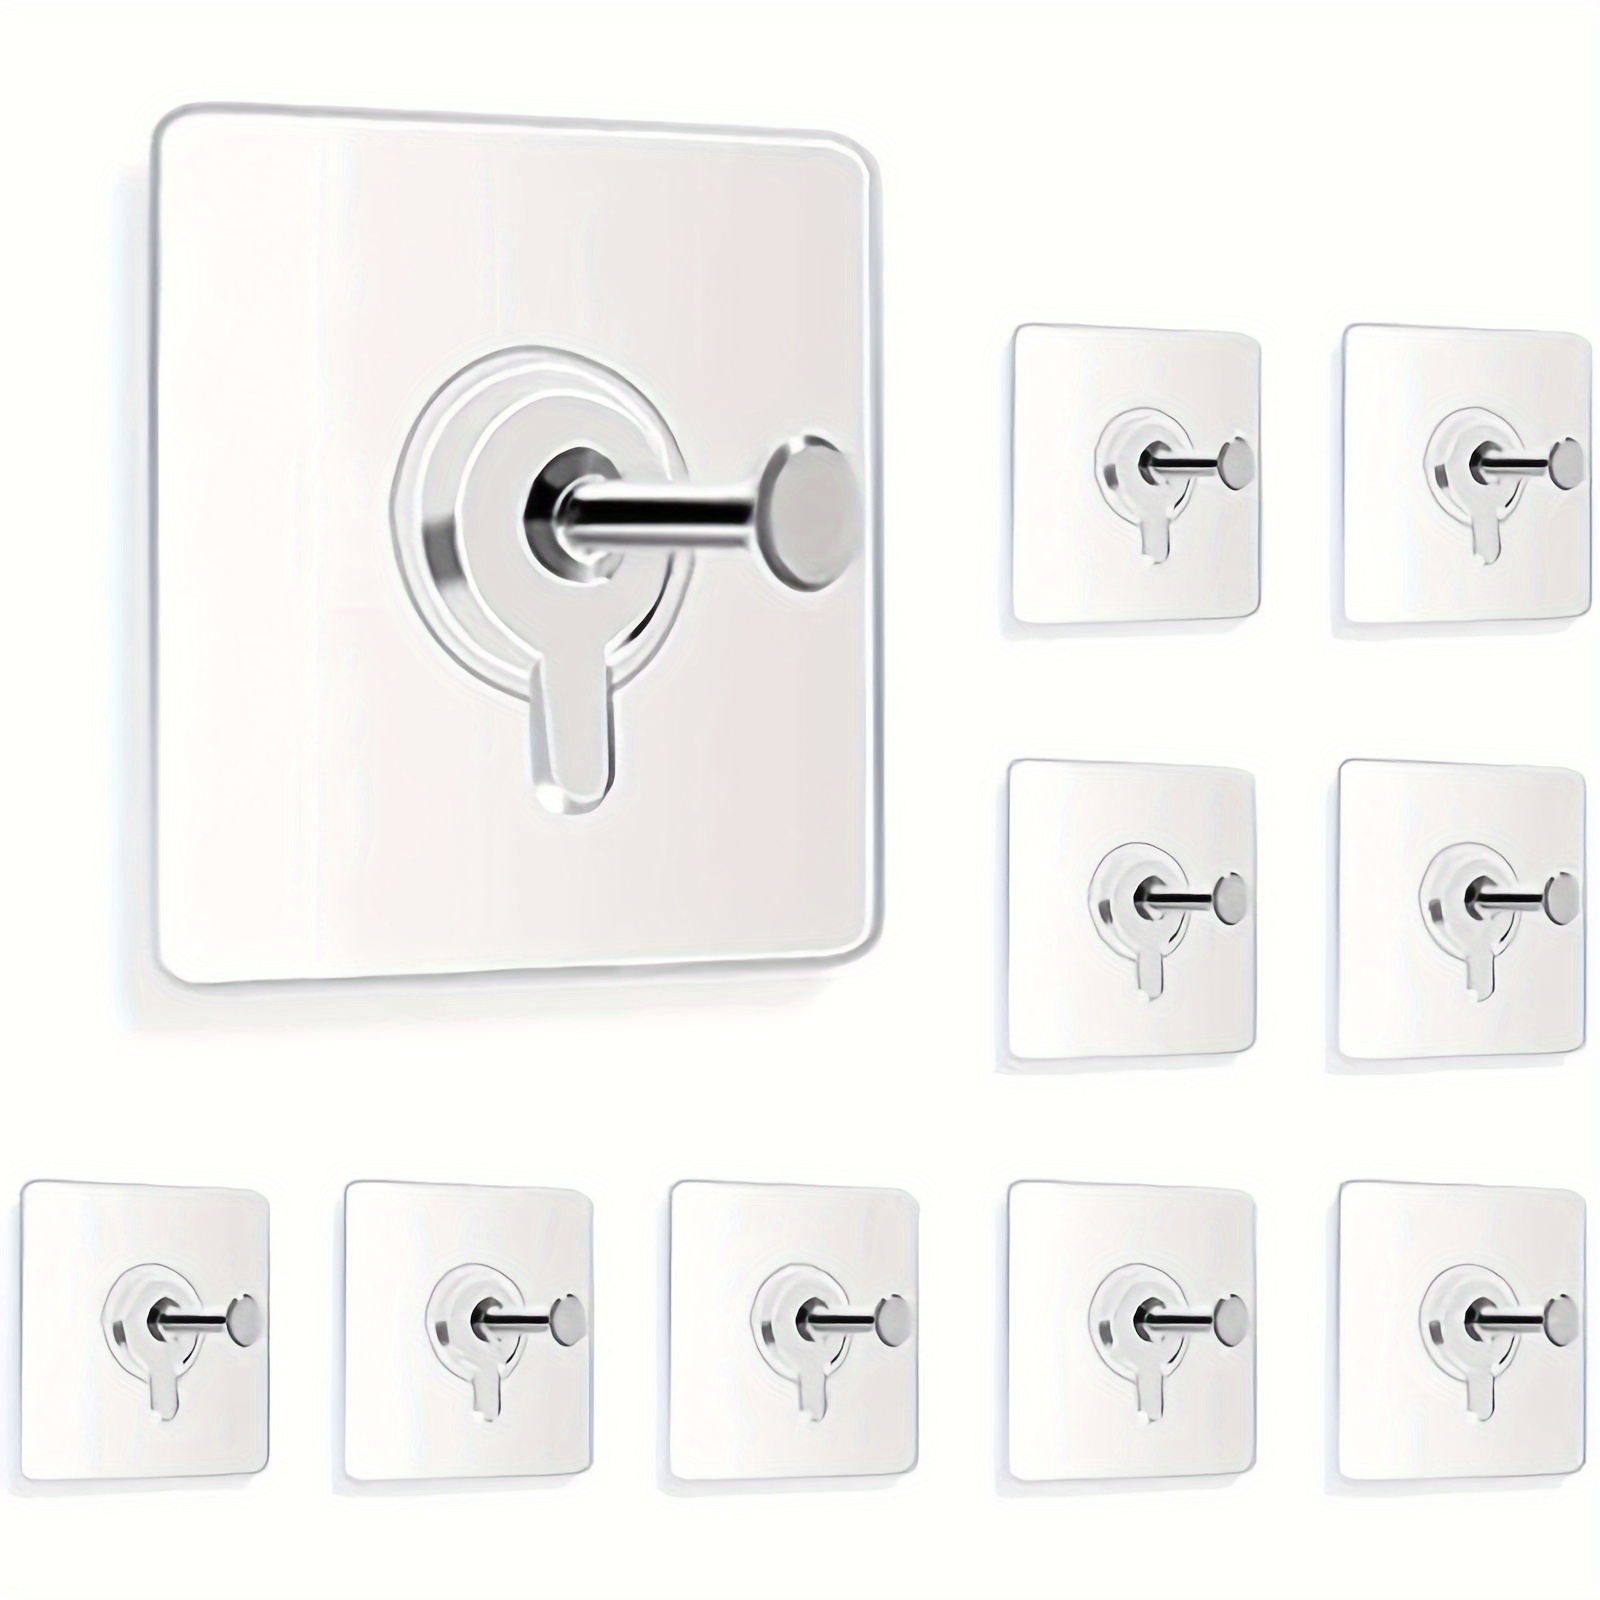 10pcs Self-Adhesive Wall Hooks, No Nails Needed For Hanging Pictures &  More, PVC Adhesive Nails For Wall Hooks - Non-Trace, No Drilling, Self  Waterpro